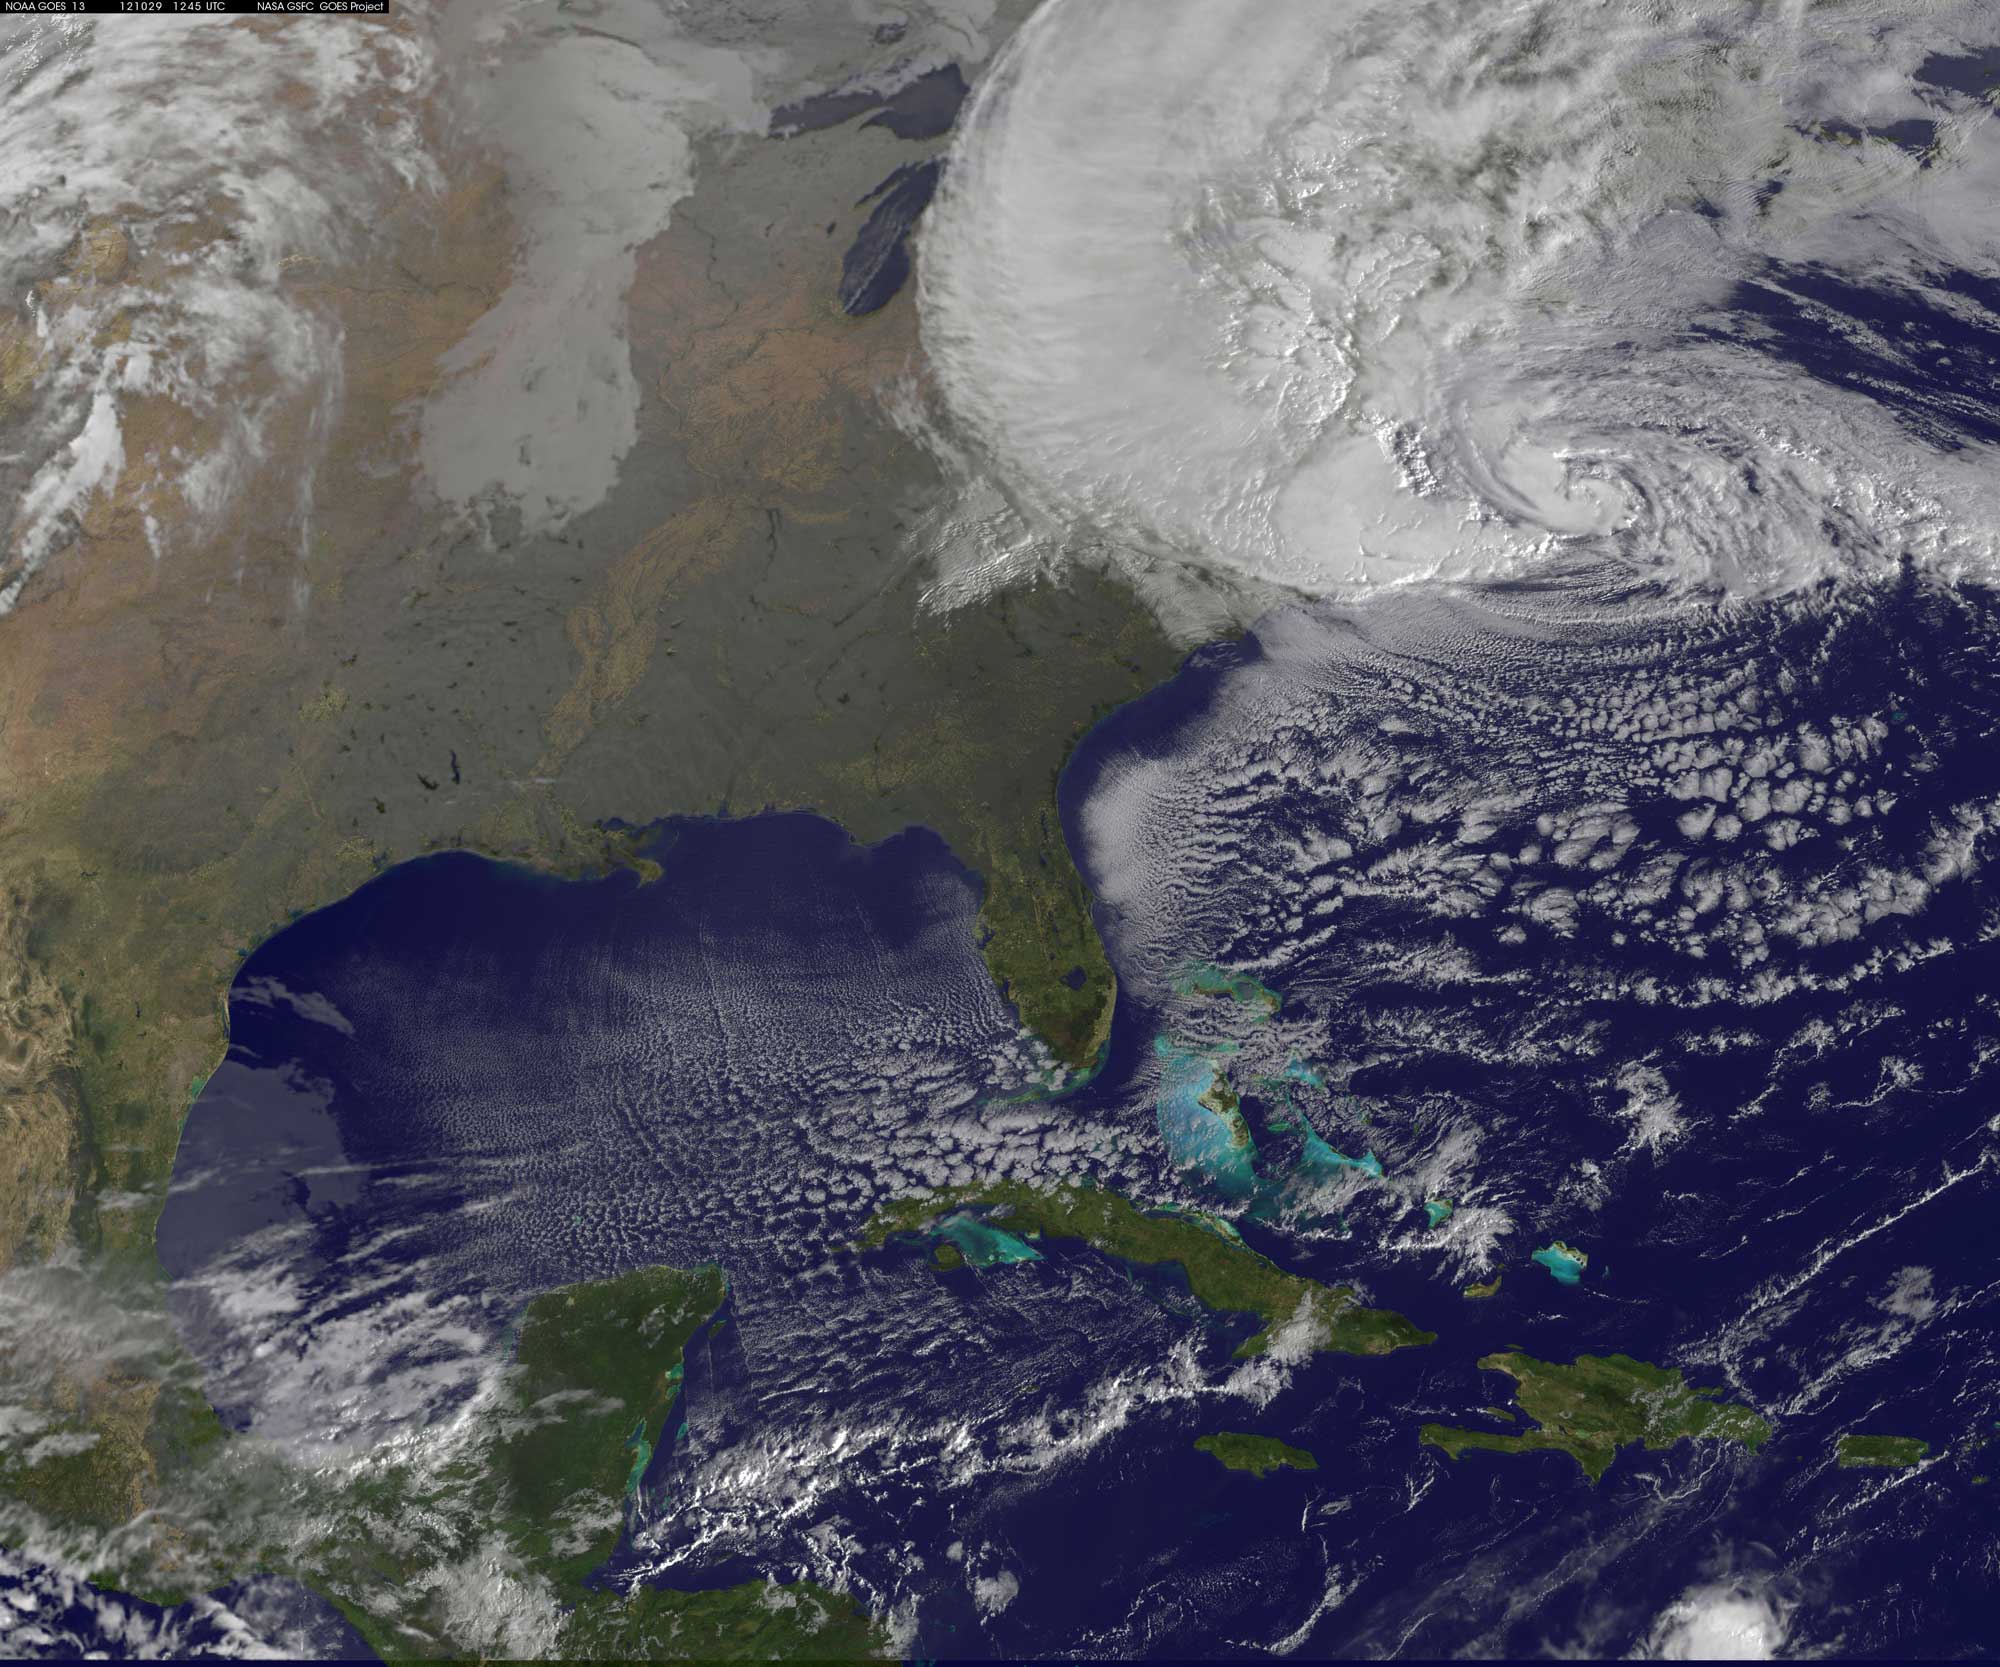 Satellite photograph of Hurricane Sandy as it hit the Northeastern U.S. on October 29, 2012. The photo shows a large cyclone sitting over the northeastern U.S., with the clouds extending west all the way to the edge of Lake Michigan in the Midwest.